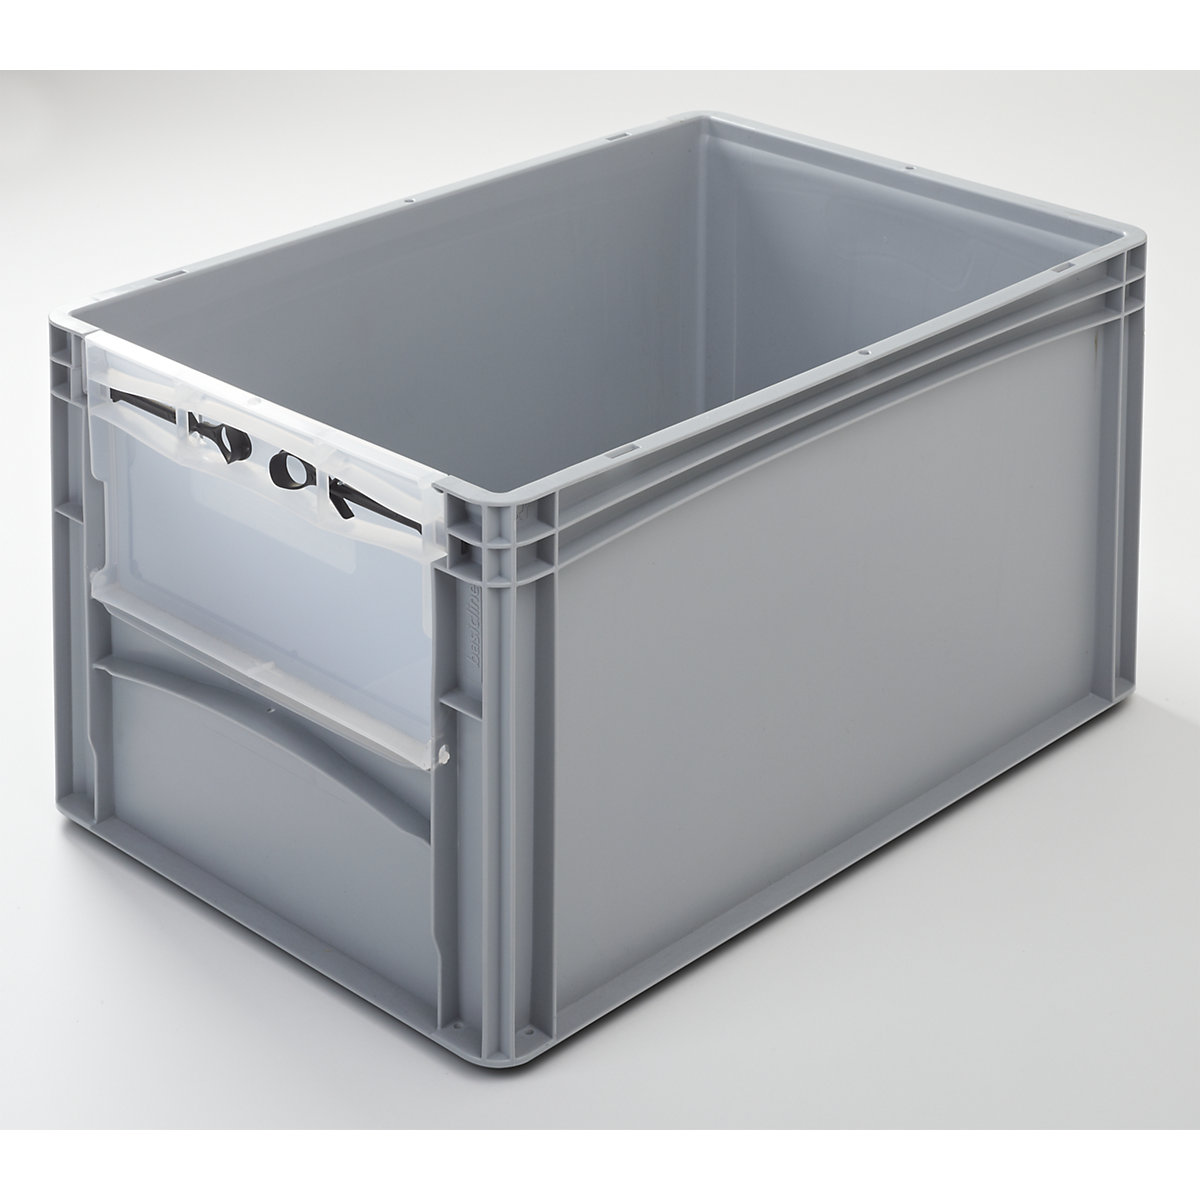 Euro size container, LxW 600 x 400 mm, with front flap, height 320 mm-3